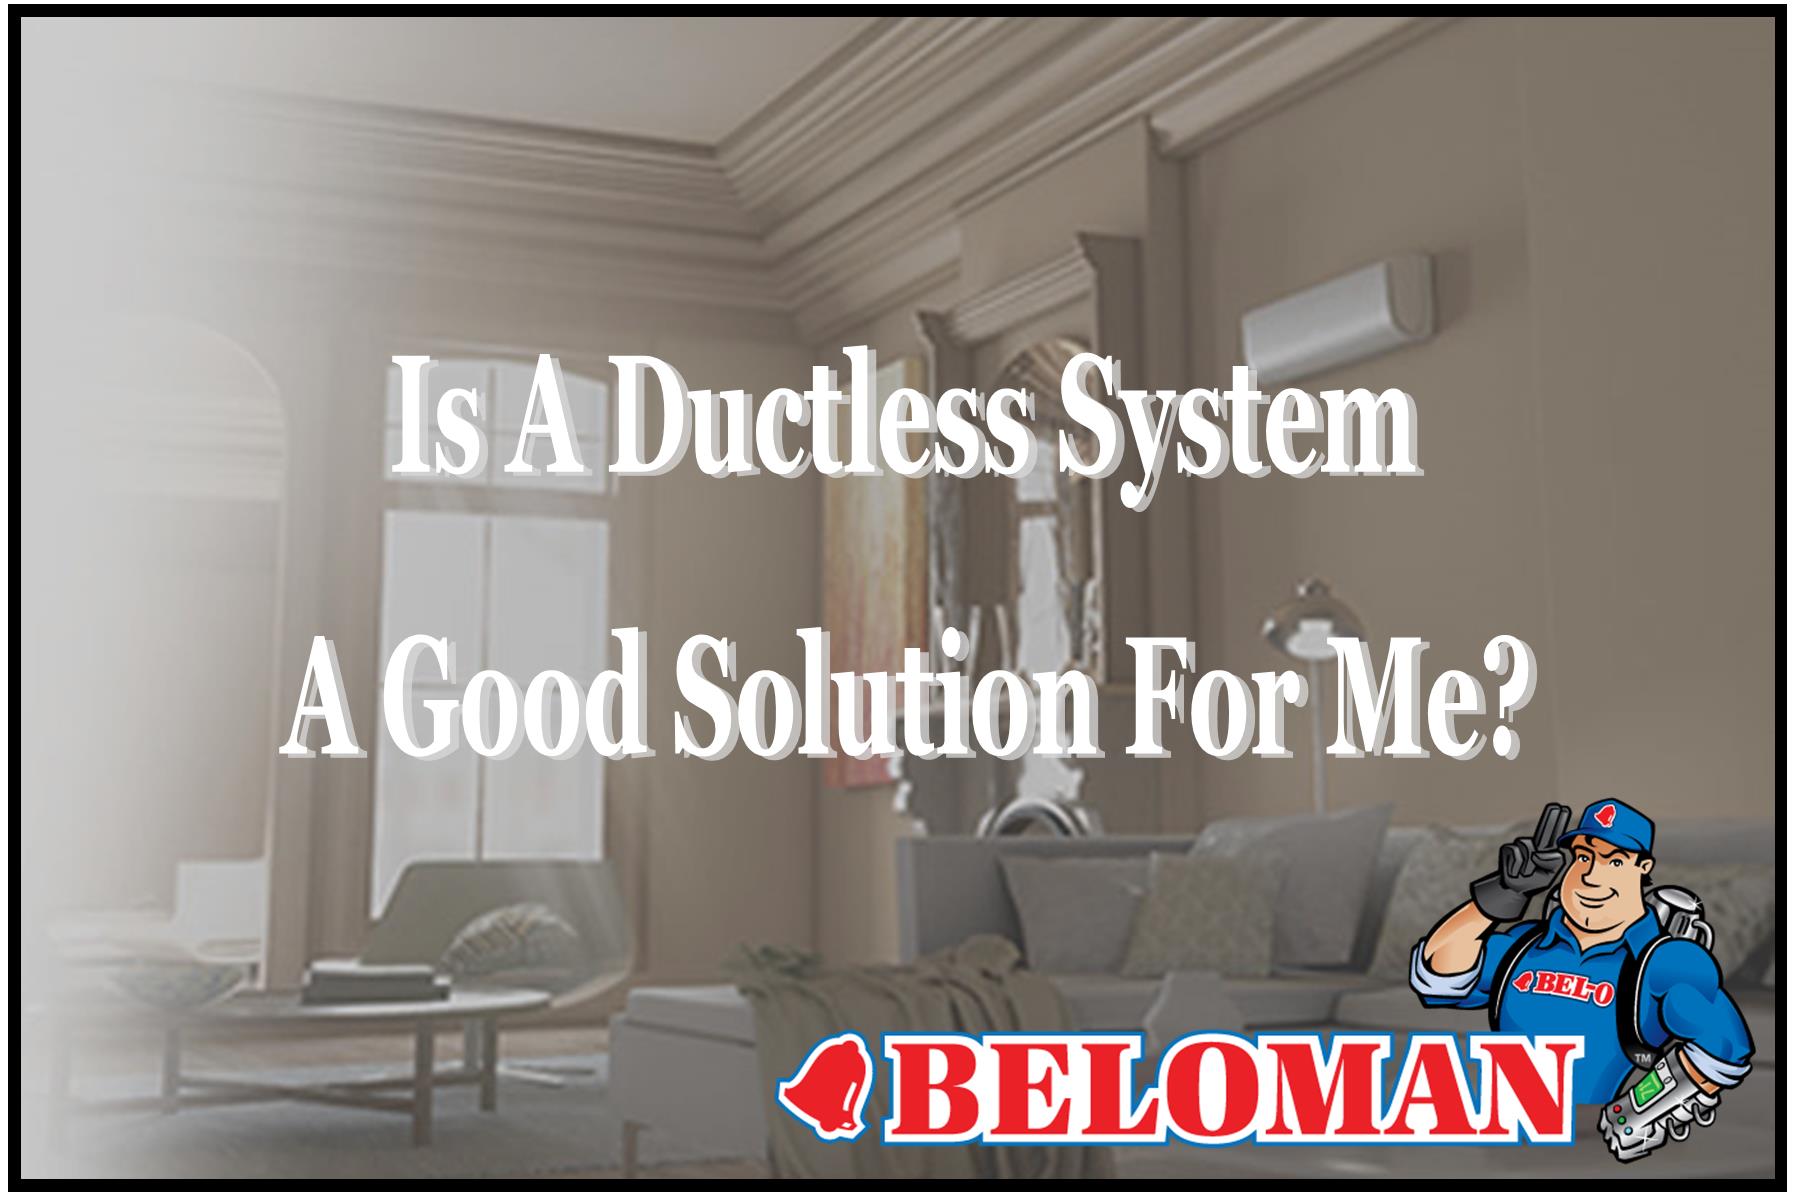 B.85 Ductless System.jpg